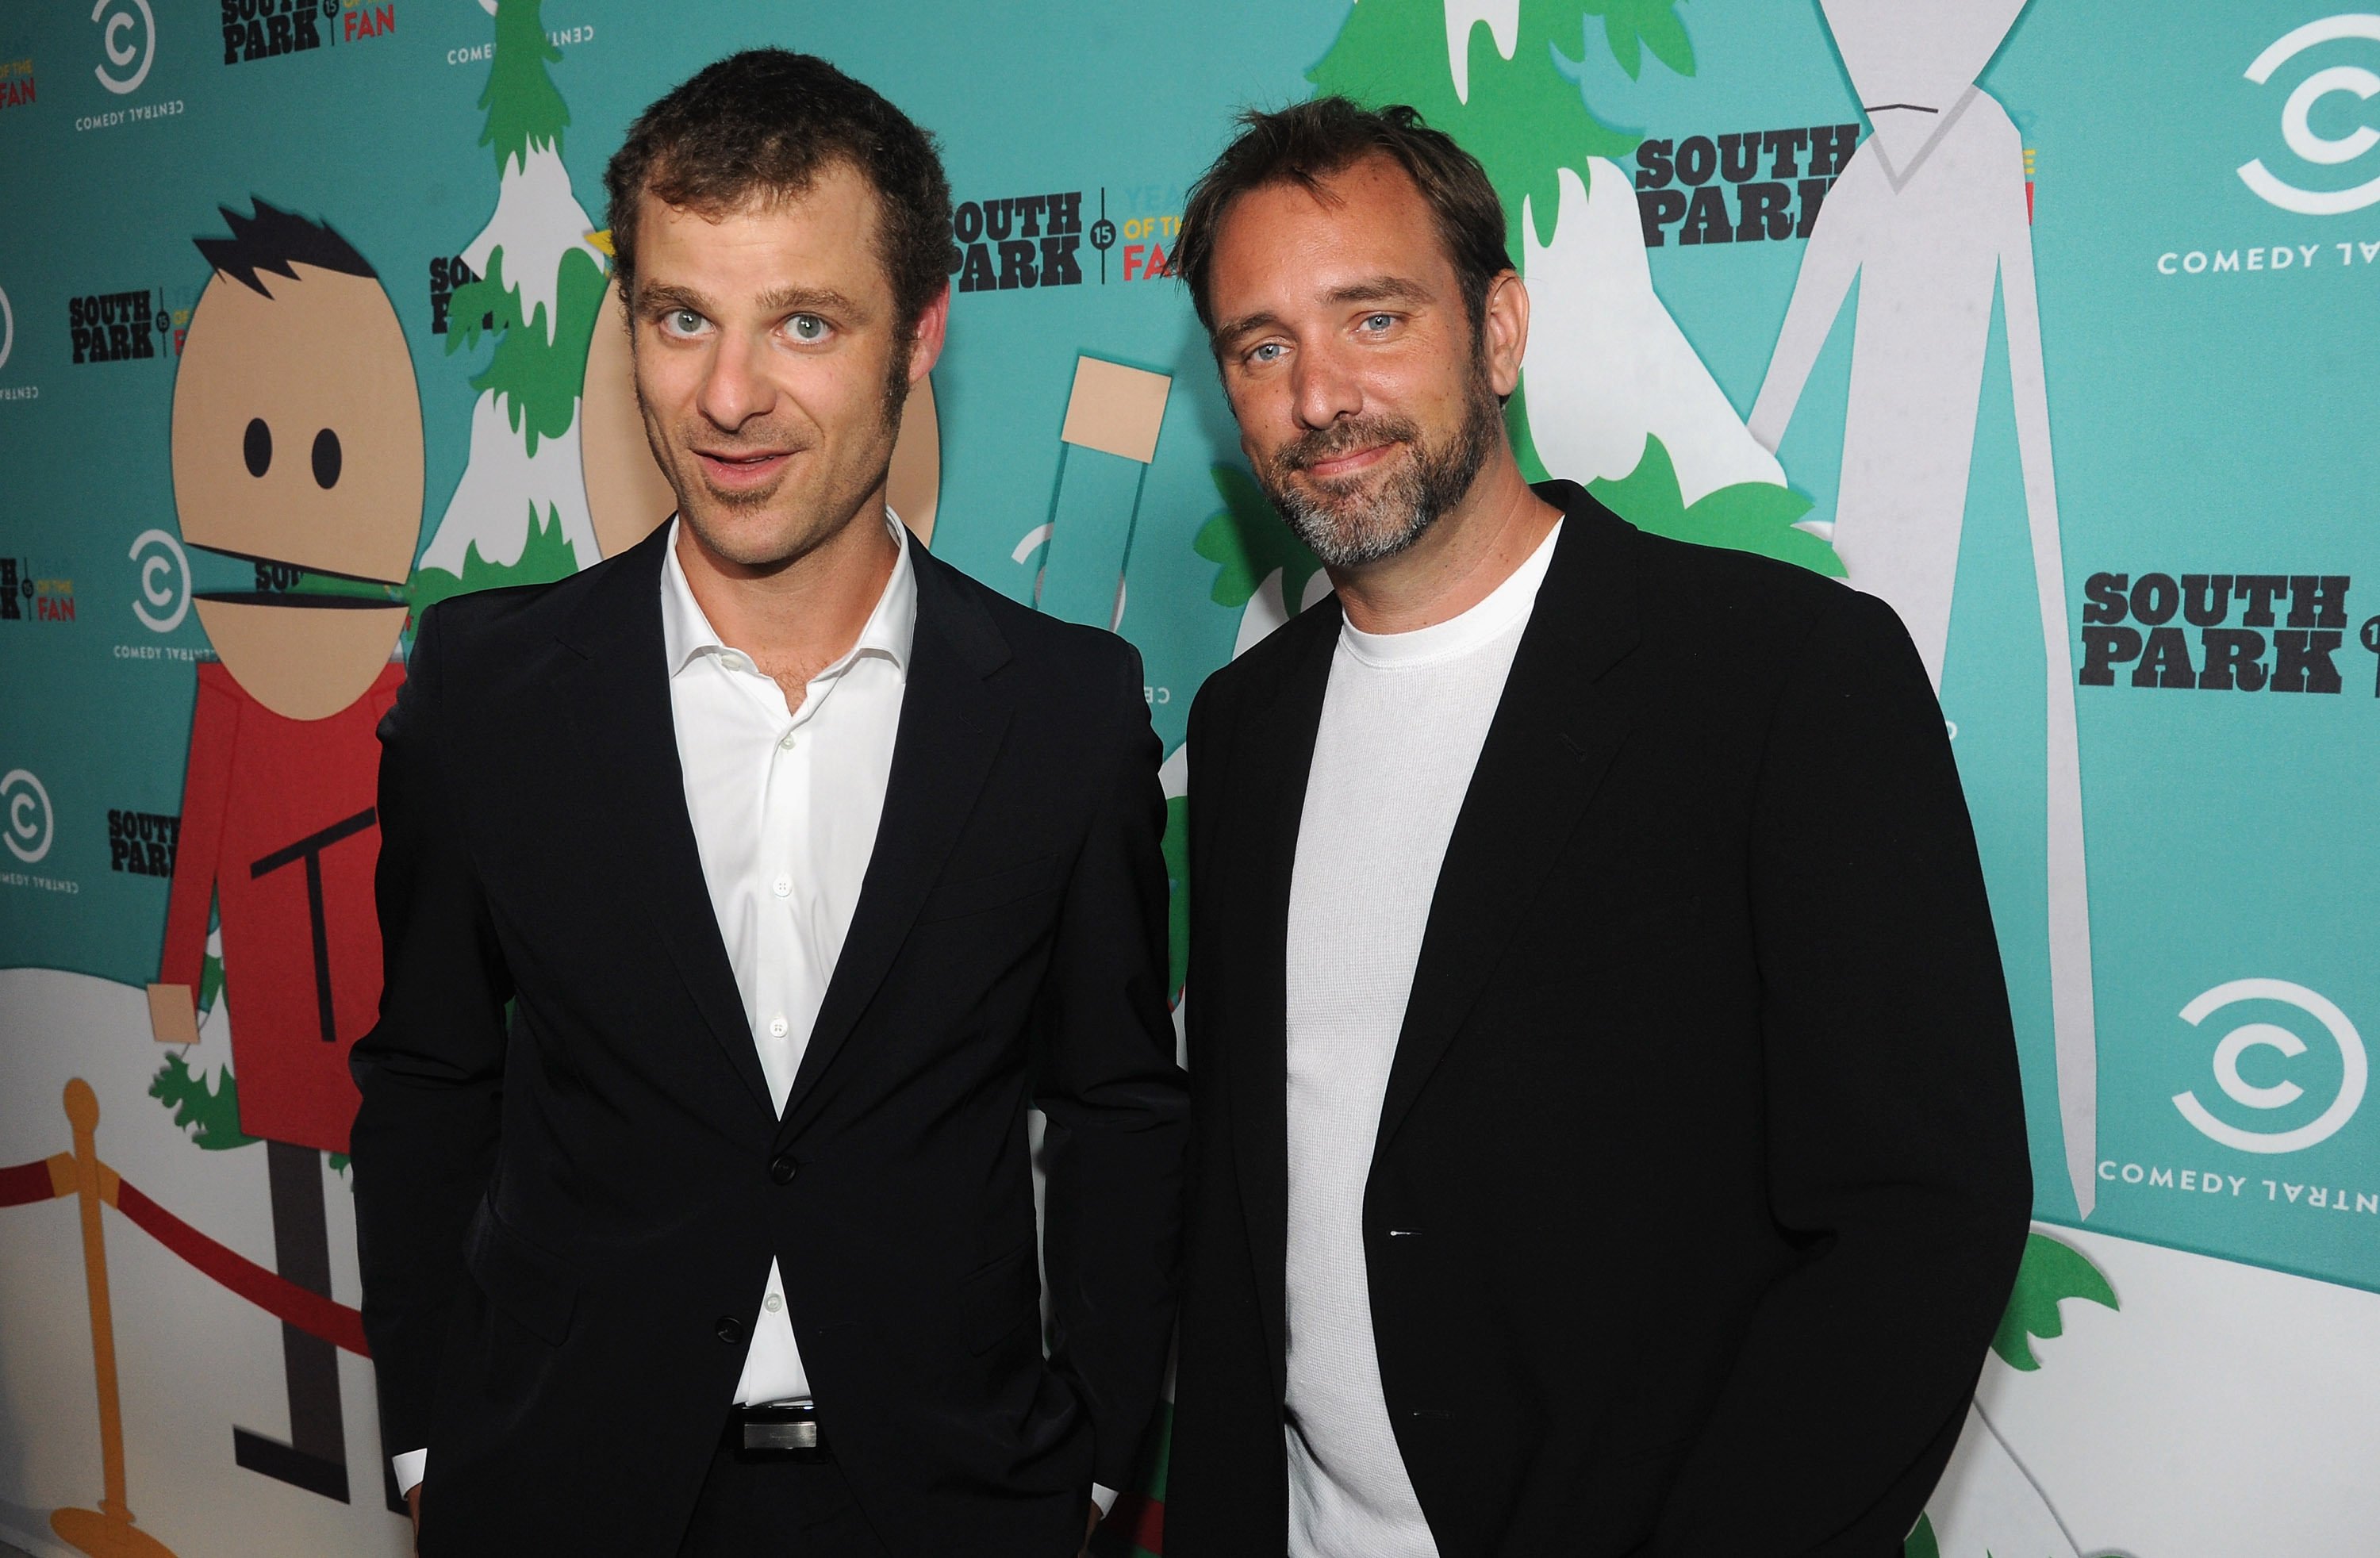 South Park creators Matt Stone and Trey Parker have made their fortune off their popular animated series as well as their show, The Book of Mormon. Photo: Getty Images